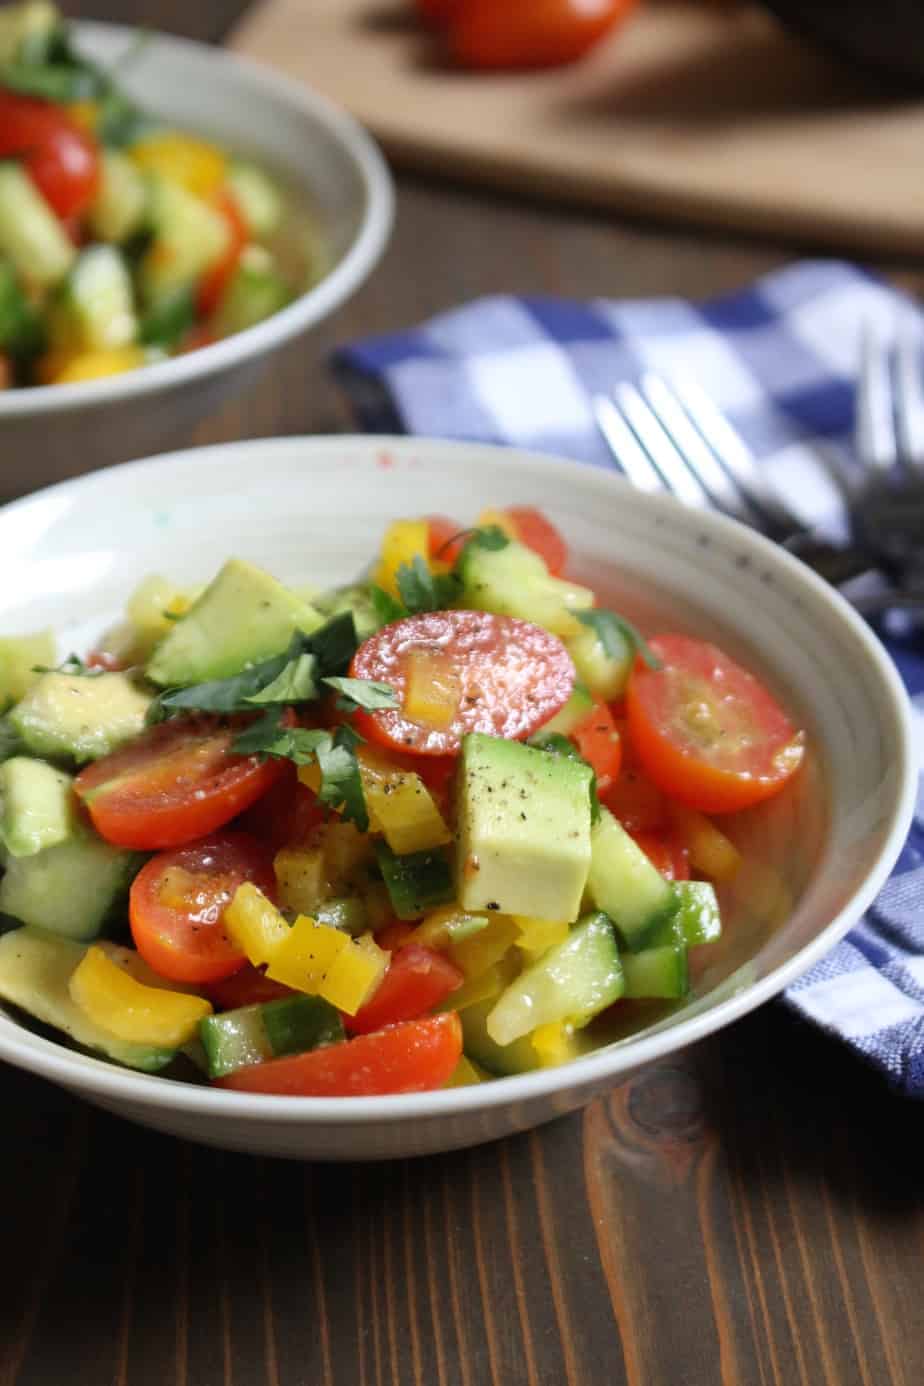 Tomatoes, Cucumbers, Avocados, Bell Pepper in an easy summer vegetable salad